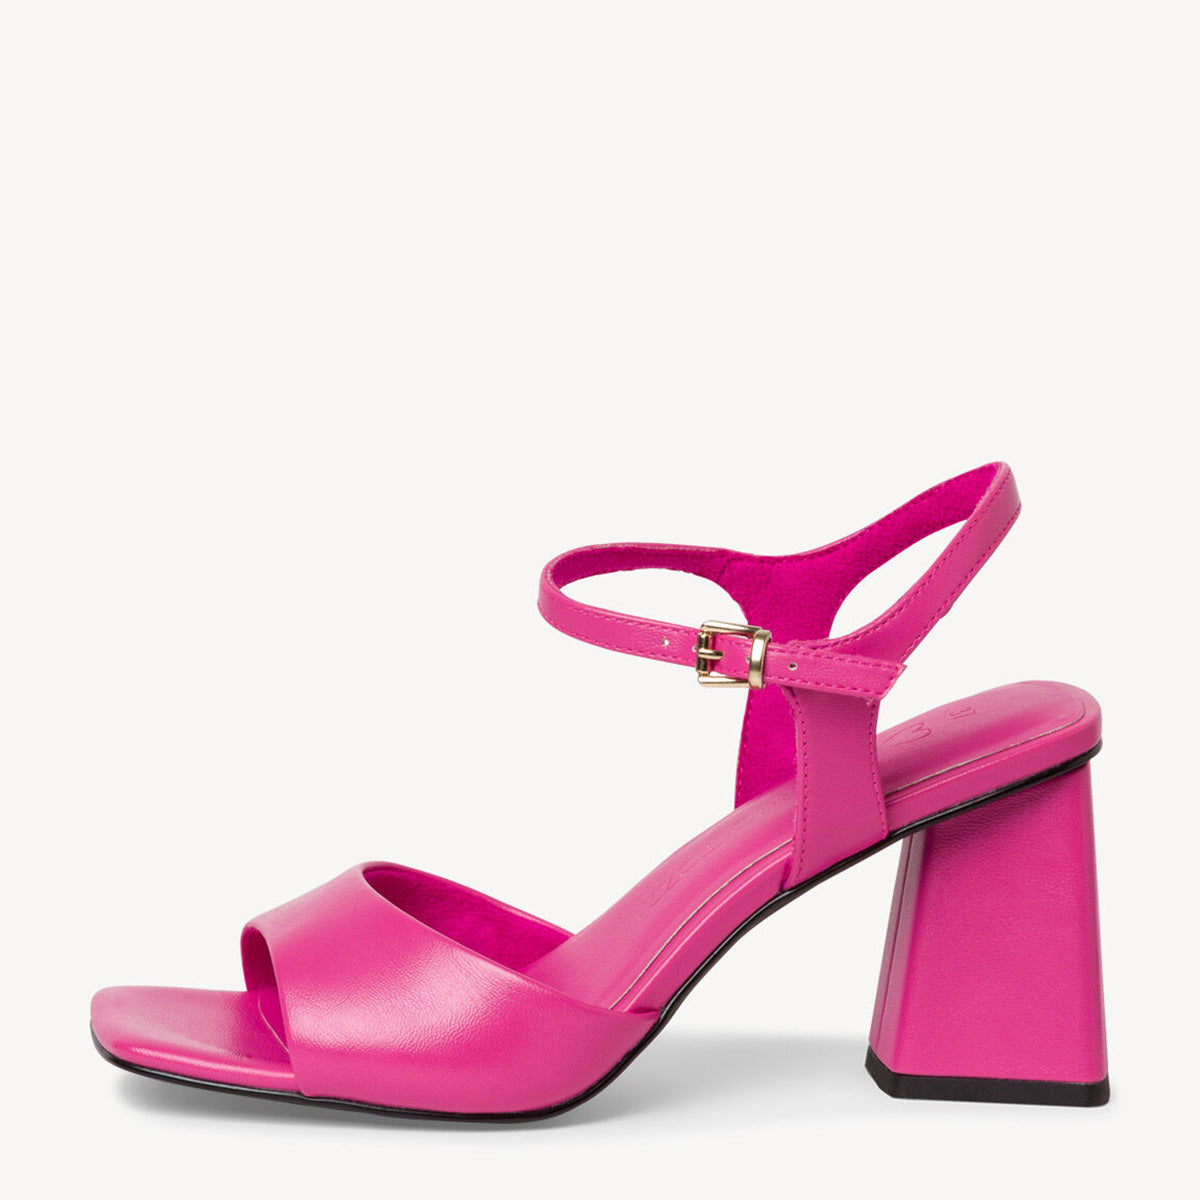 Dazzling Hot Pink Dress Sandals for a Bold Statement